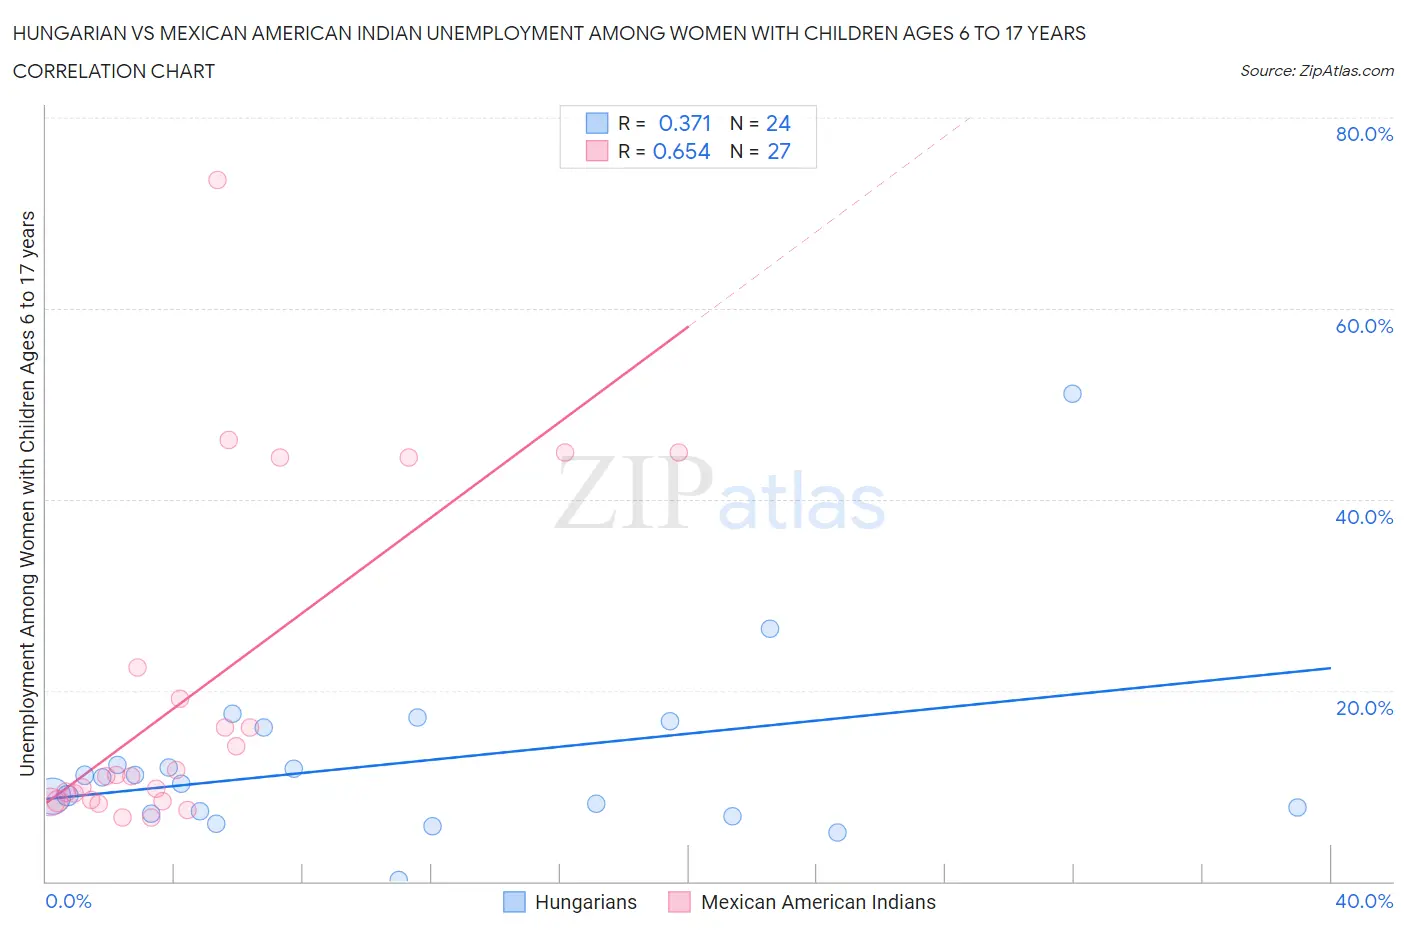 Hungarian vs Mexican American Indian Unemployment Among Women with Children Ages 6 to 17 years